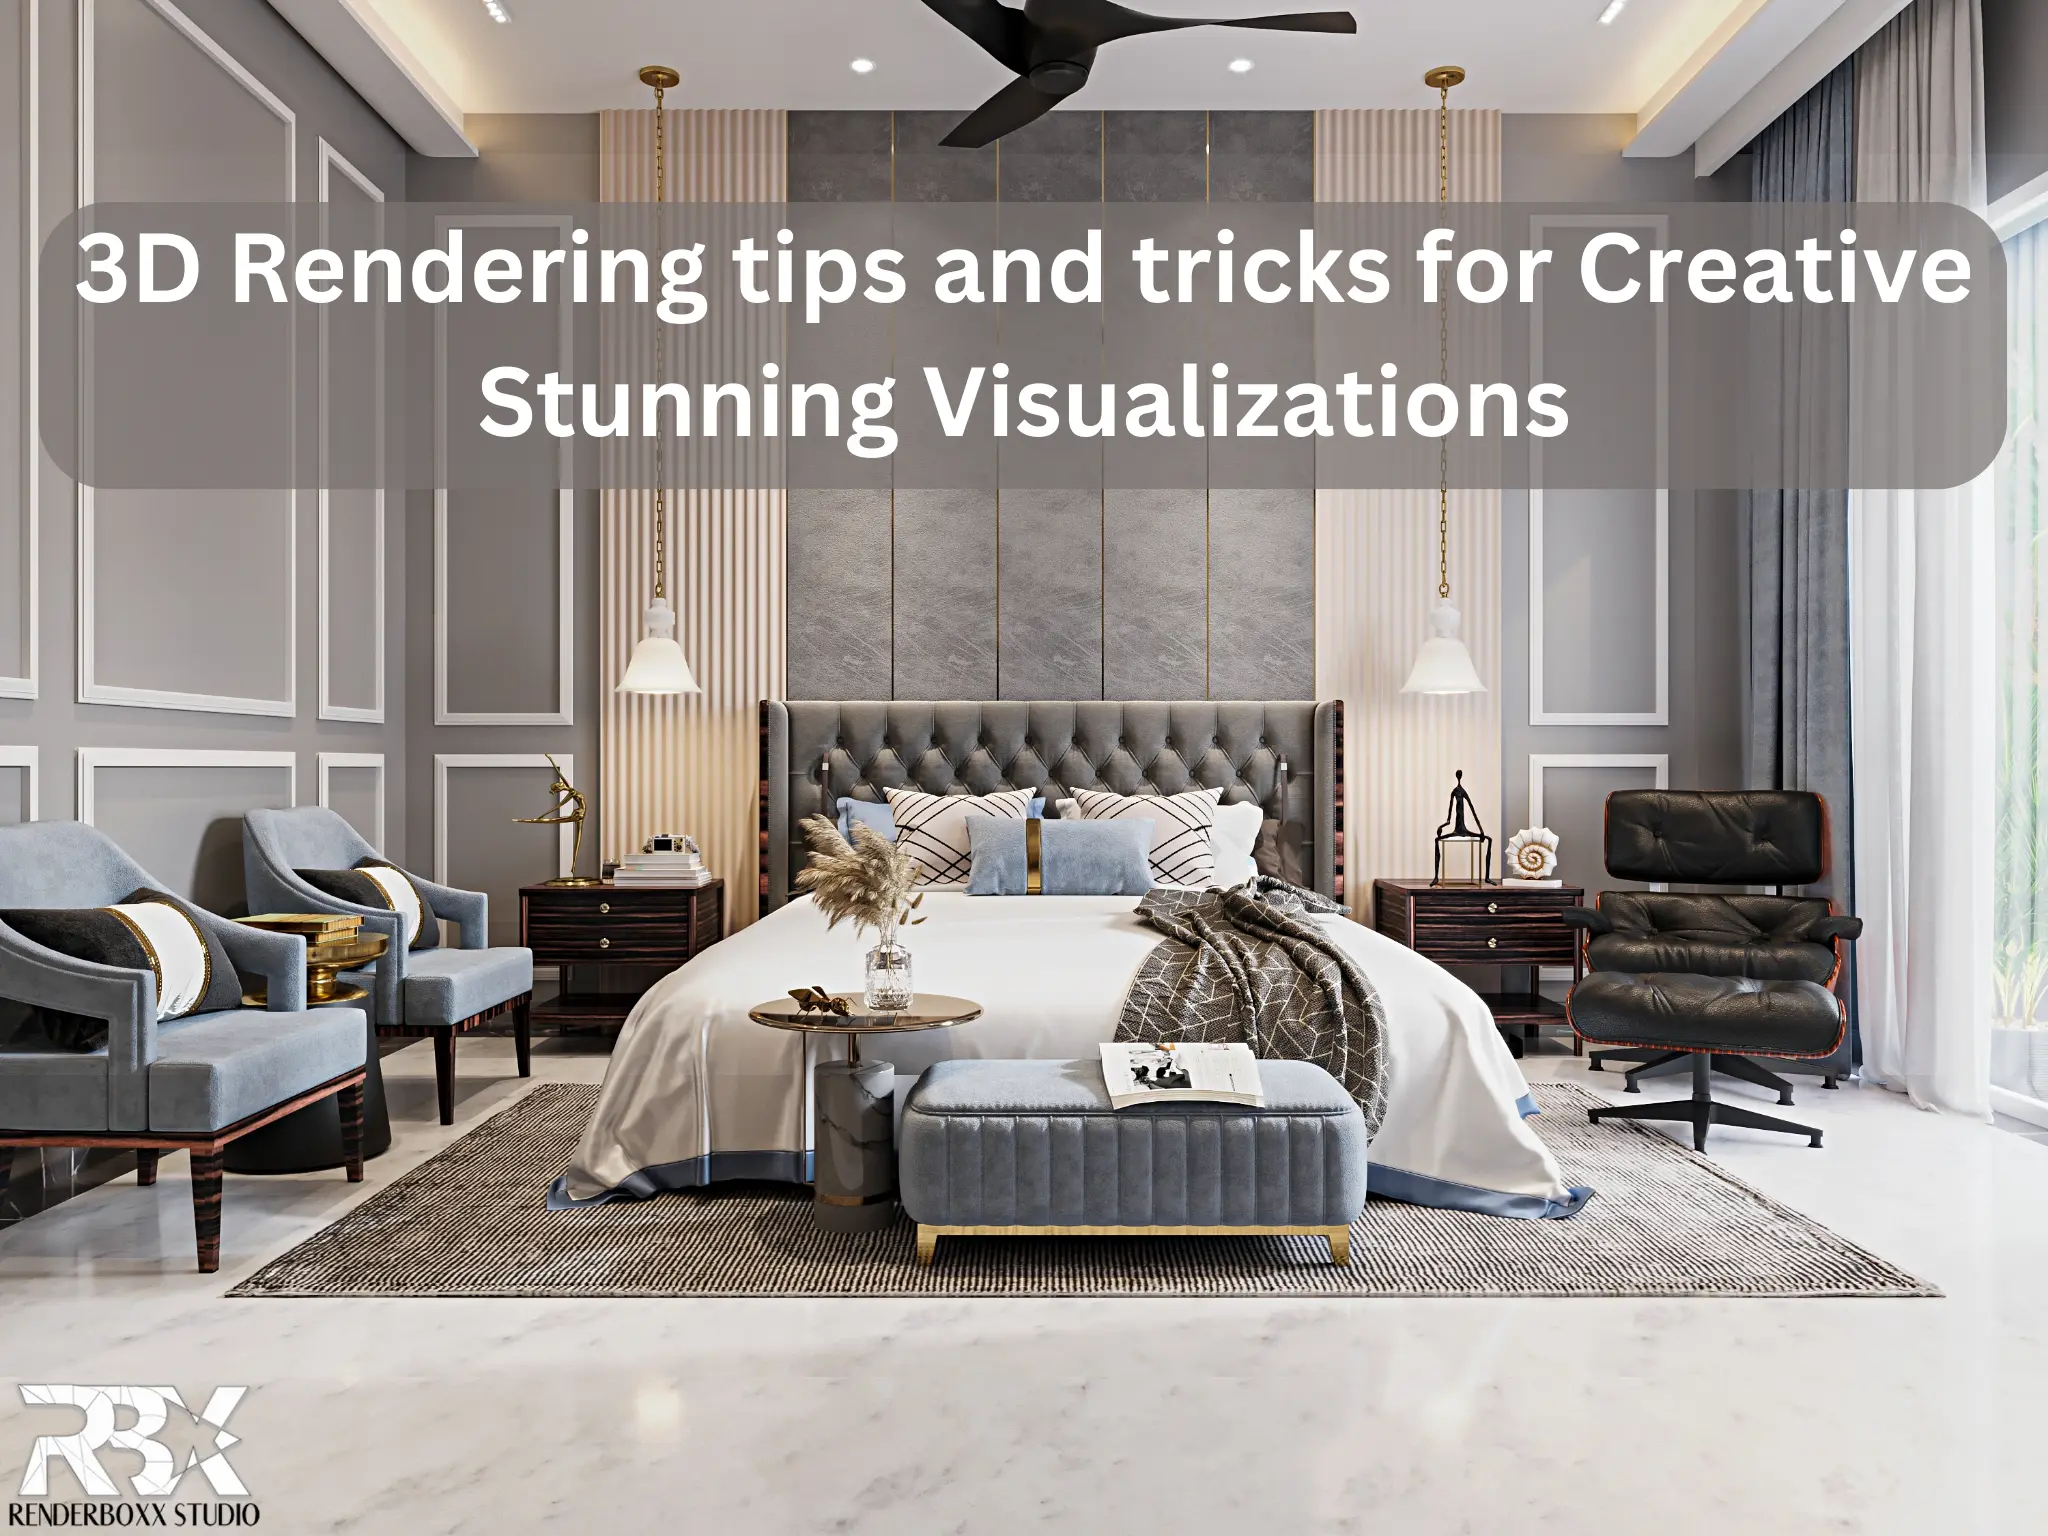 Rendering-tips-and-tricks-for-Creative-Stunning-Visualizations